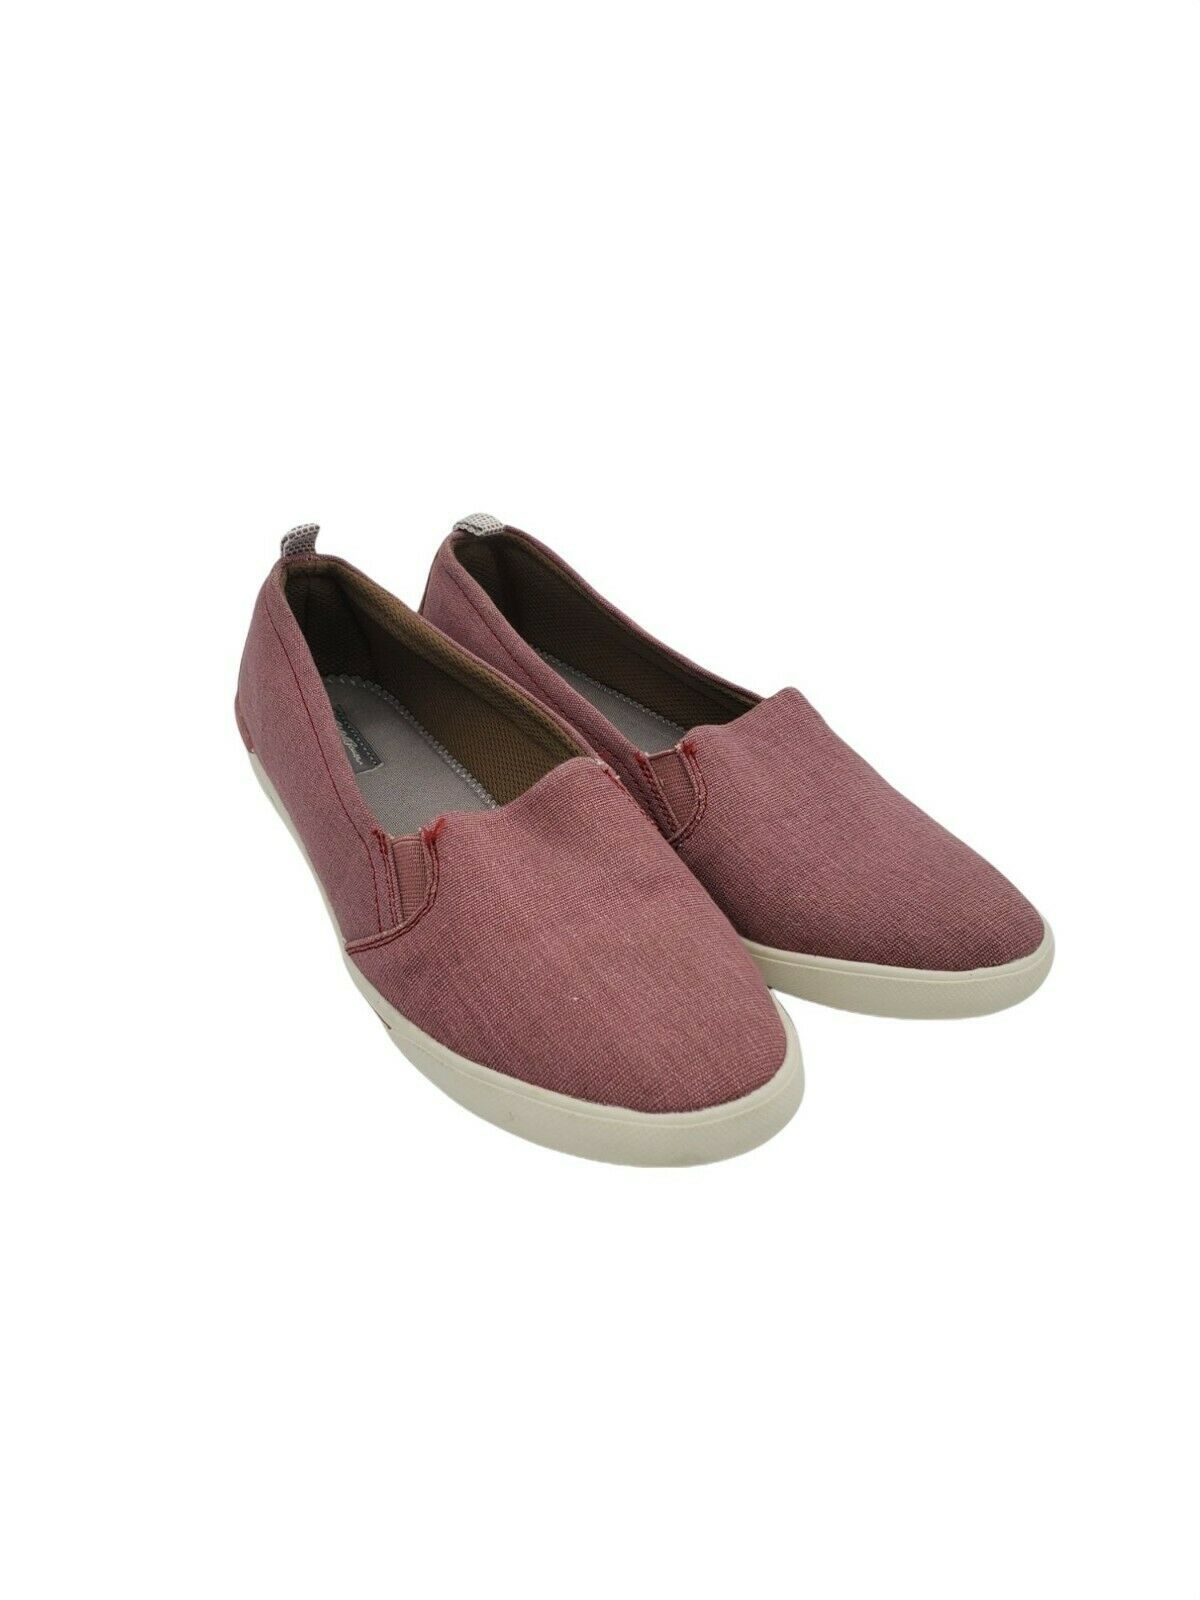 Primary image for Eddie Bauer Slip On Shoes 9 Womens Burgundy Round Toe Casual Walking Shoes